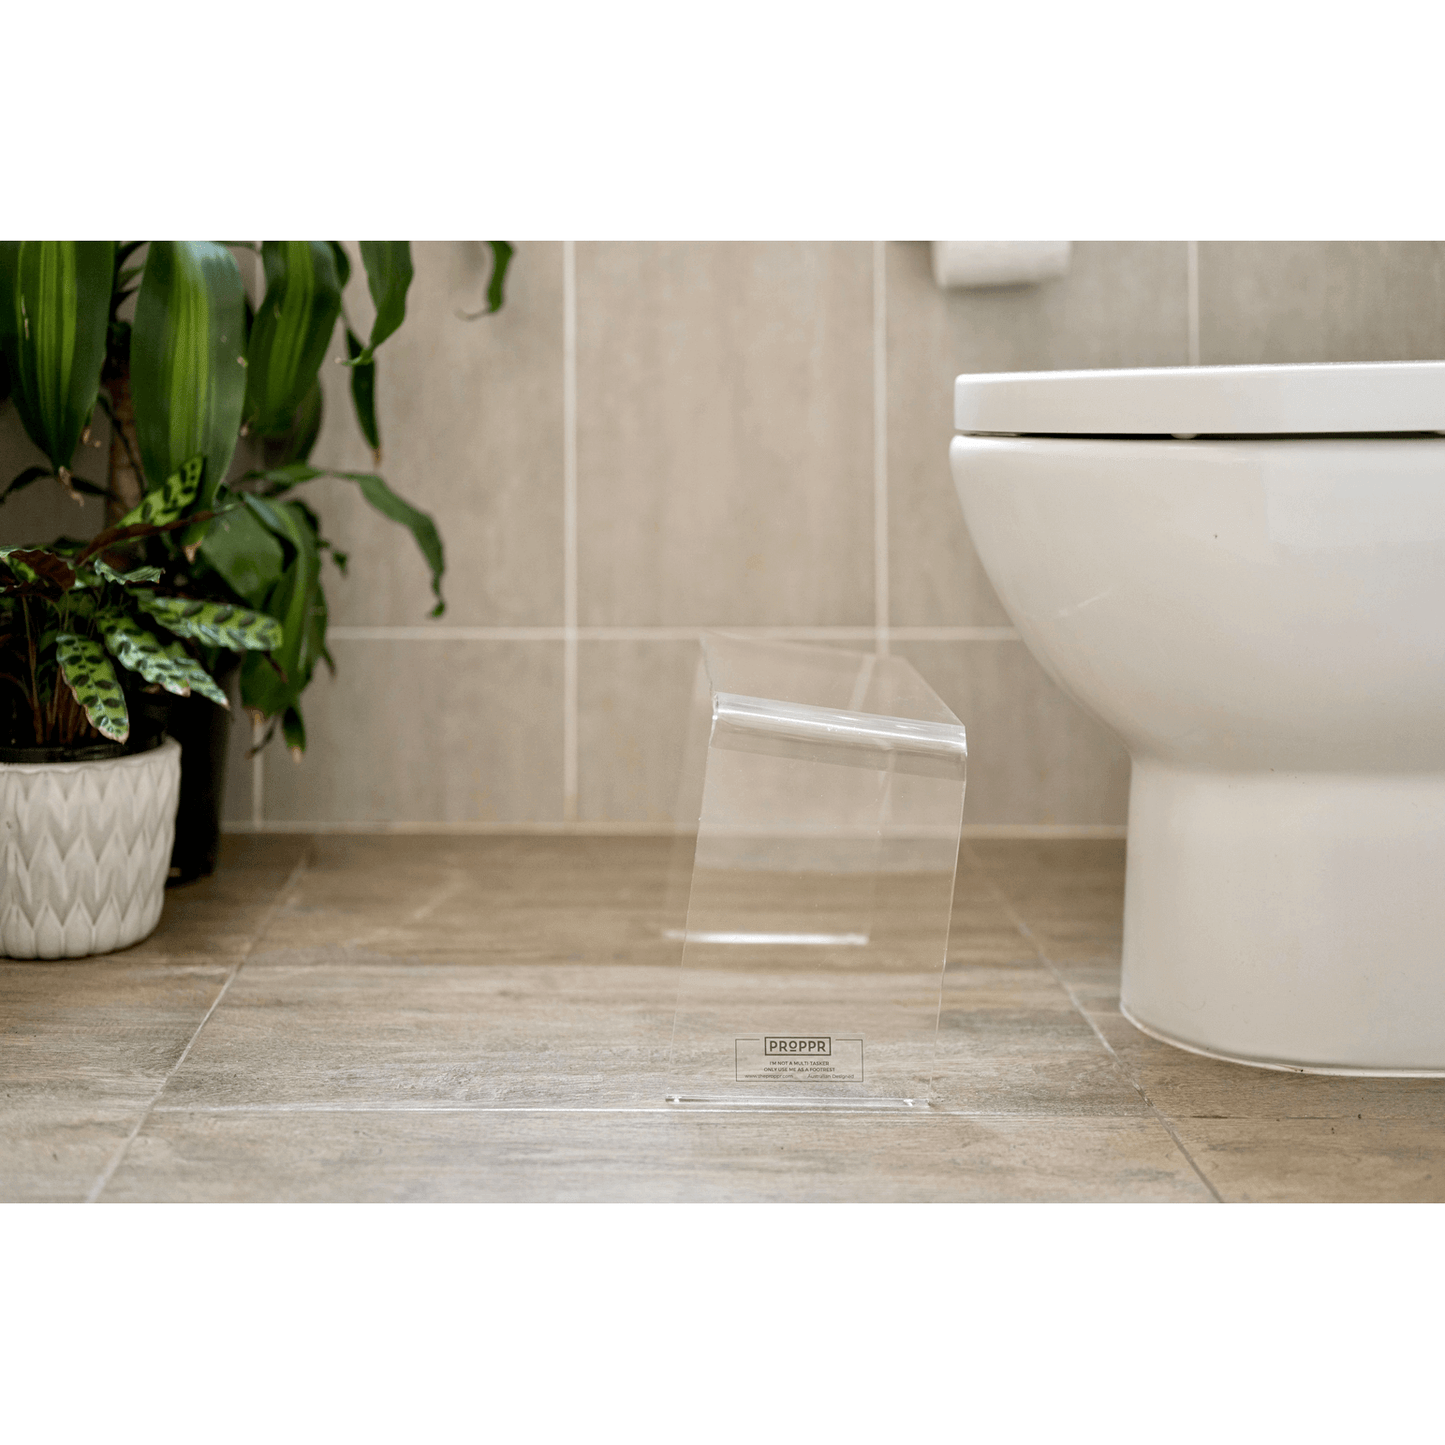 The PROPPR Acer - Clear Toilet Foot Stool - side view in a bathroom